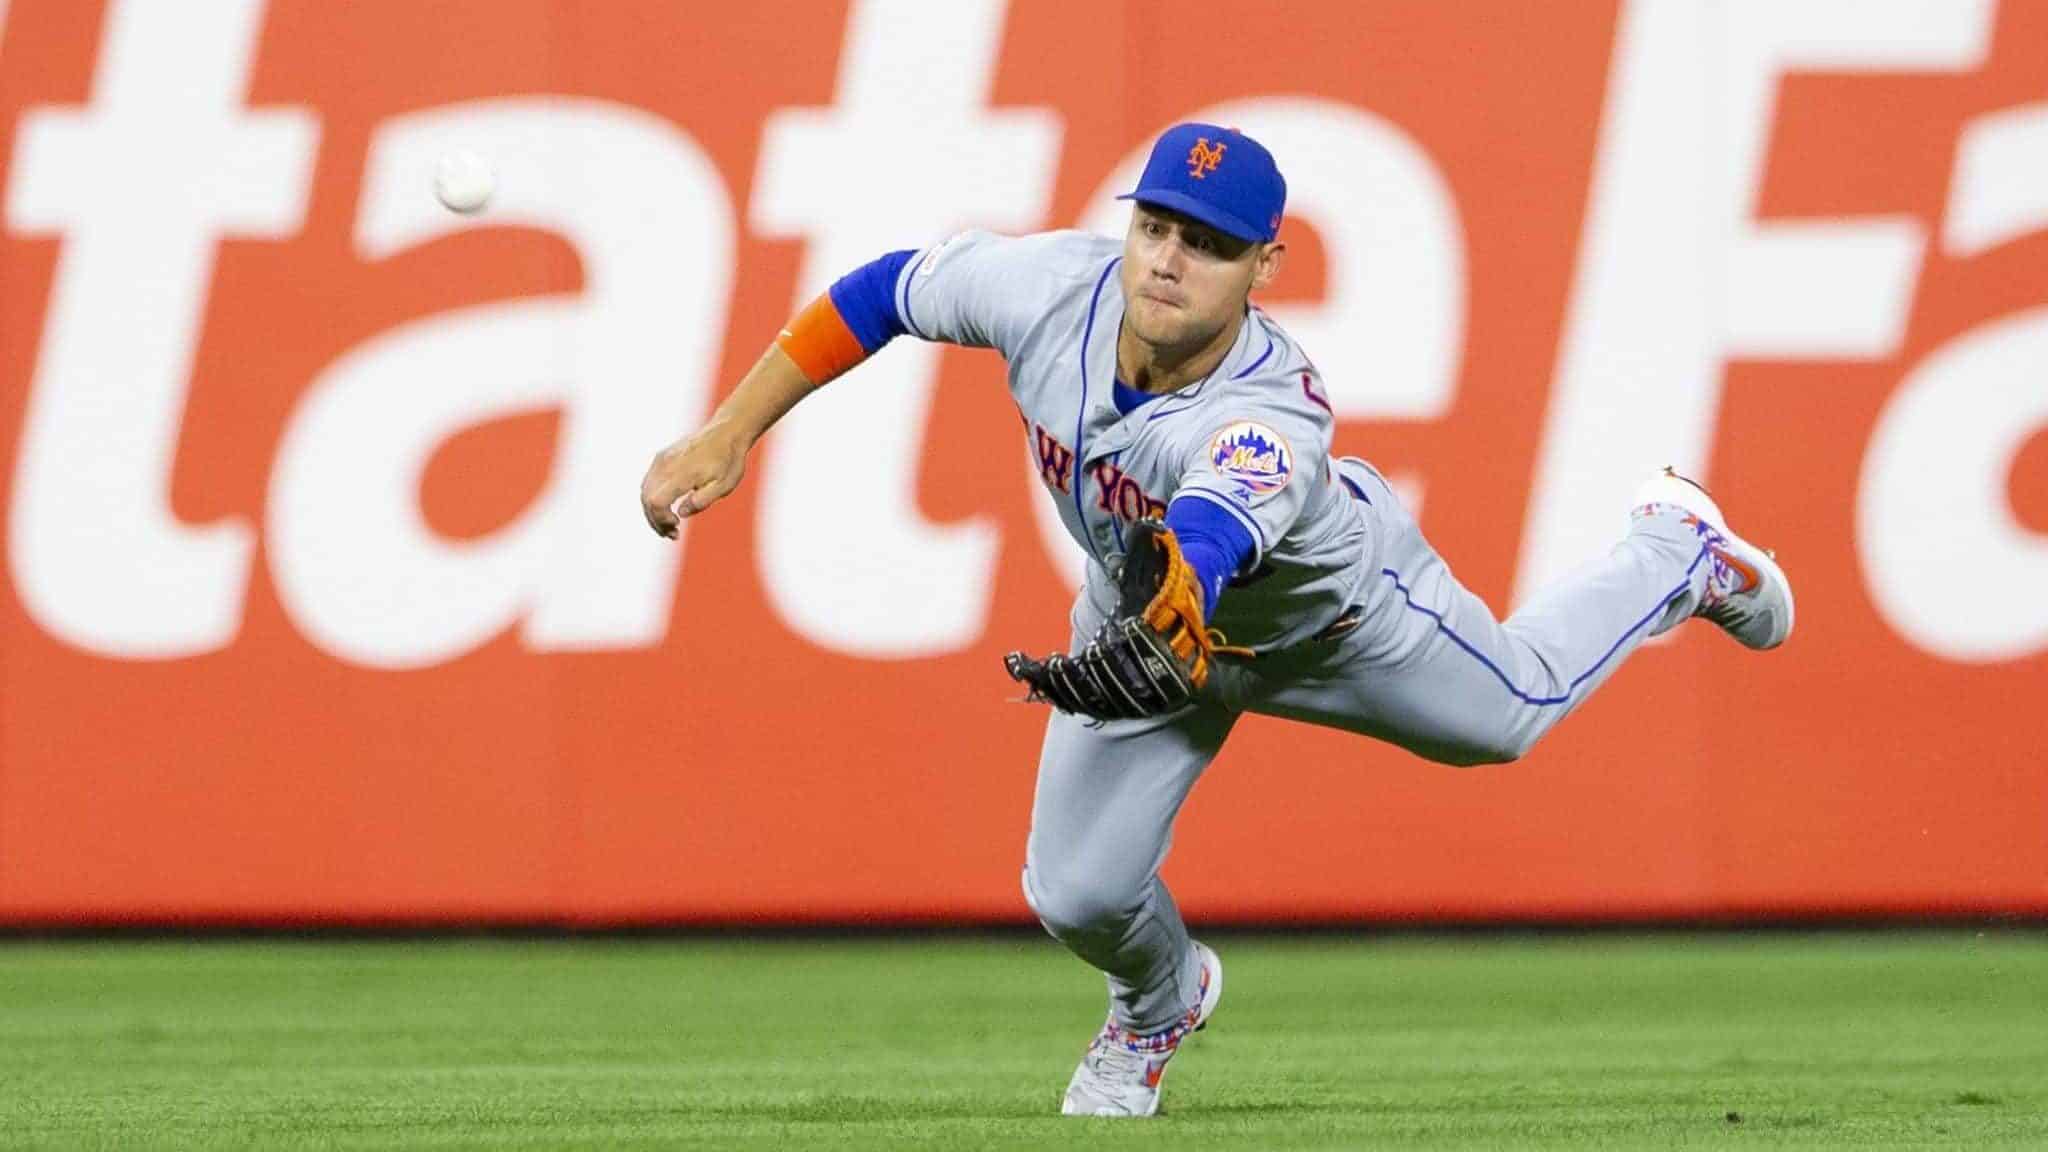 PHILADELPHIA, PA - AUGUST 30: Michael Conforto #30 of the New York Mets makes a diving catch on a ball hit by J.T. Realmuto #10 of the Philadelphia Phillies in the bottom of the fifth inning at Citizens Bank Park on August 30, 2019 in Philadelphia, Pennsylvania. The Mets defeated the Phillies 11-5.